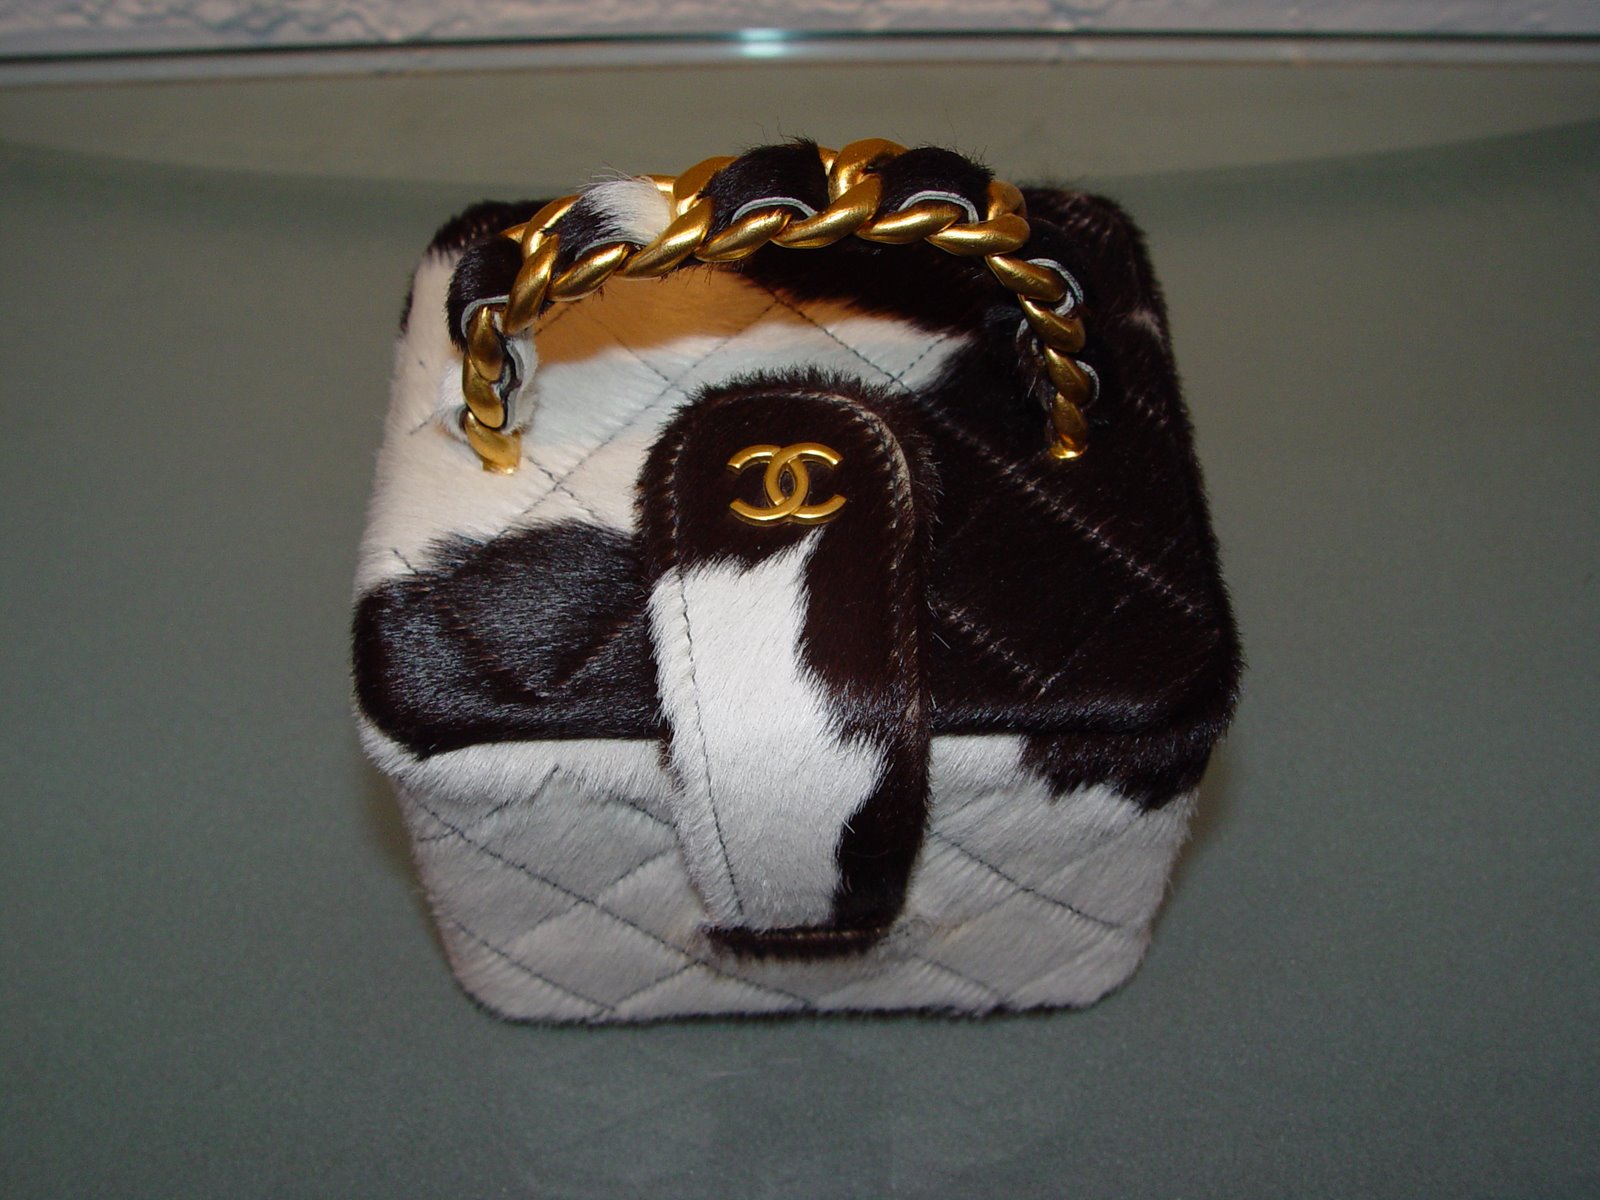 [CHANEL+80S+CALICO+QUILTED+PONY+BOX+3+AND+QUARTER+HIGH+BY+4+AND+HALF+C+80S.JPG.JPG]